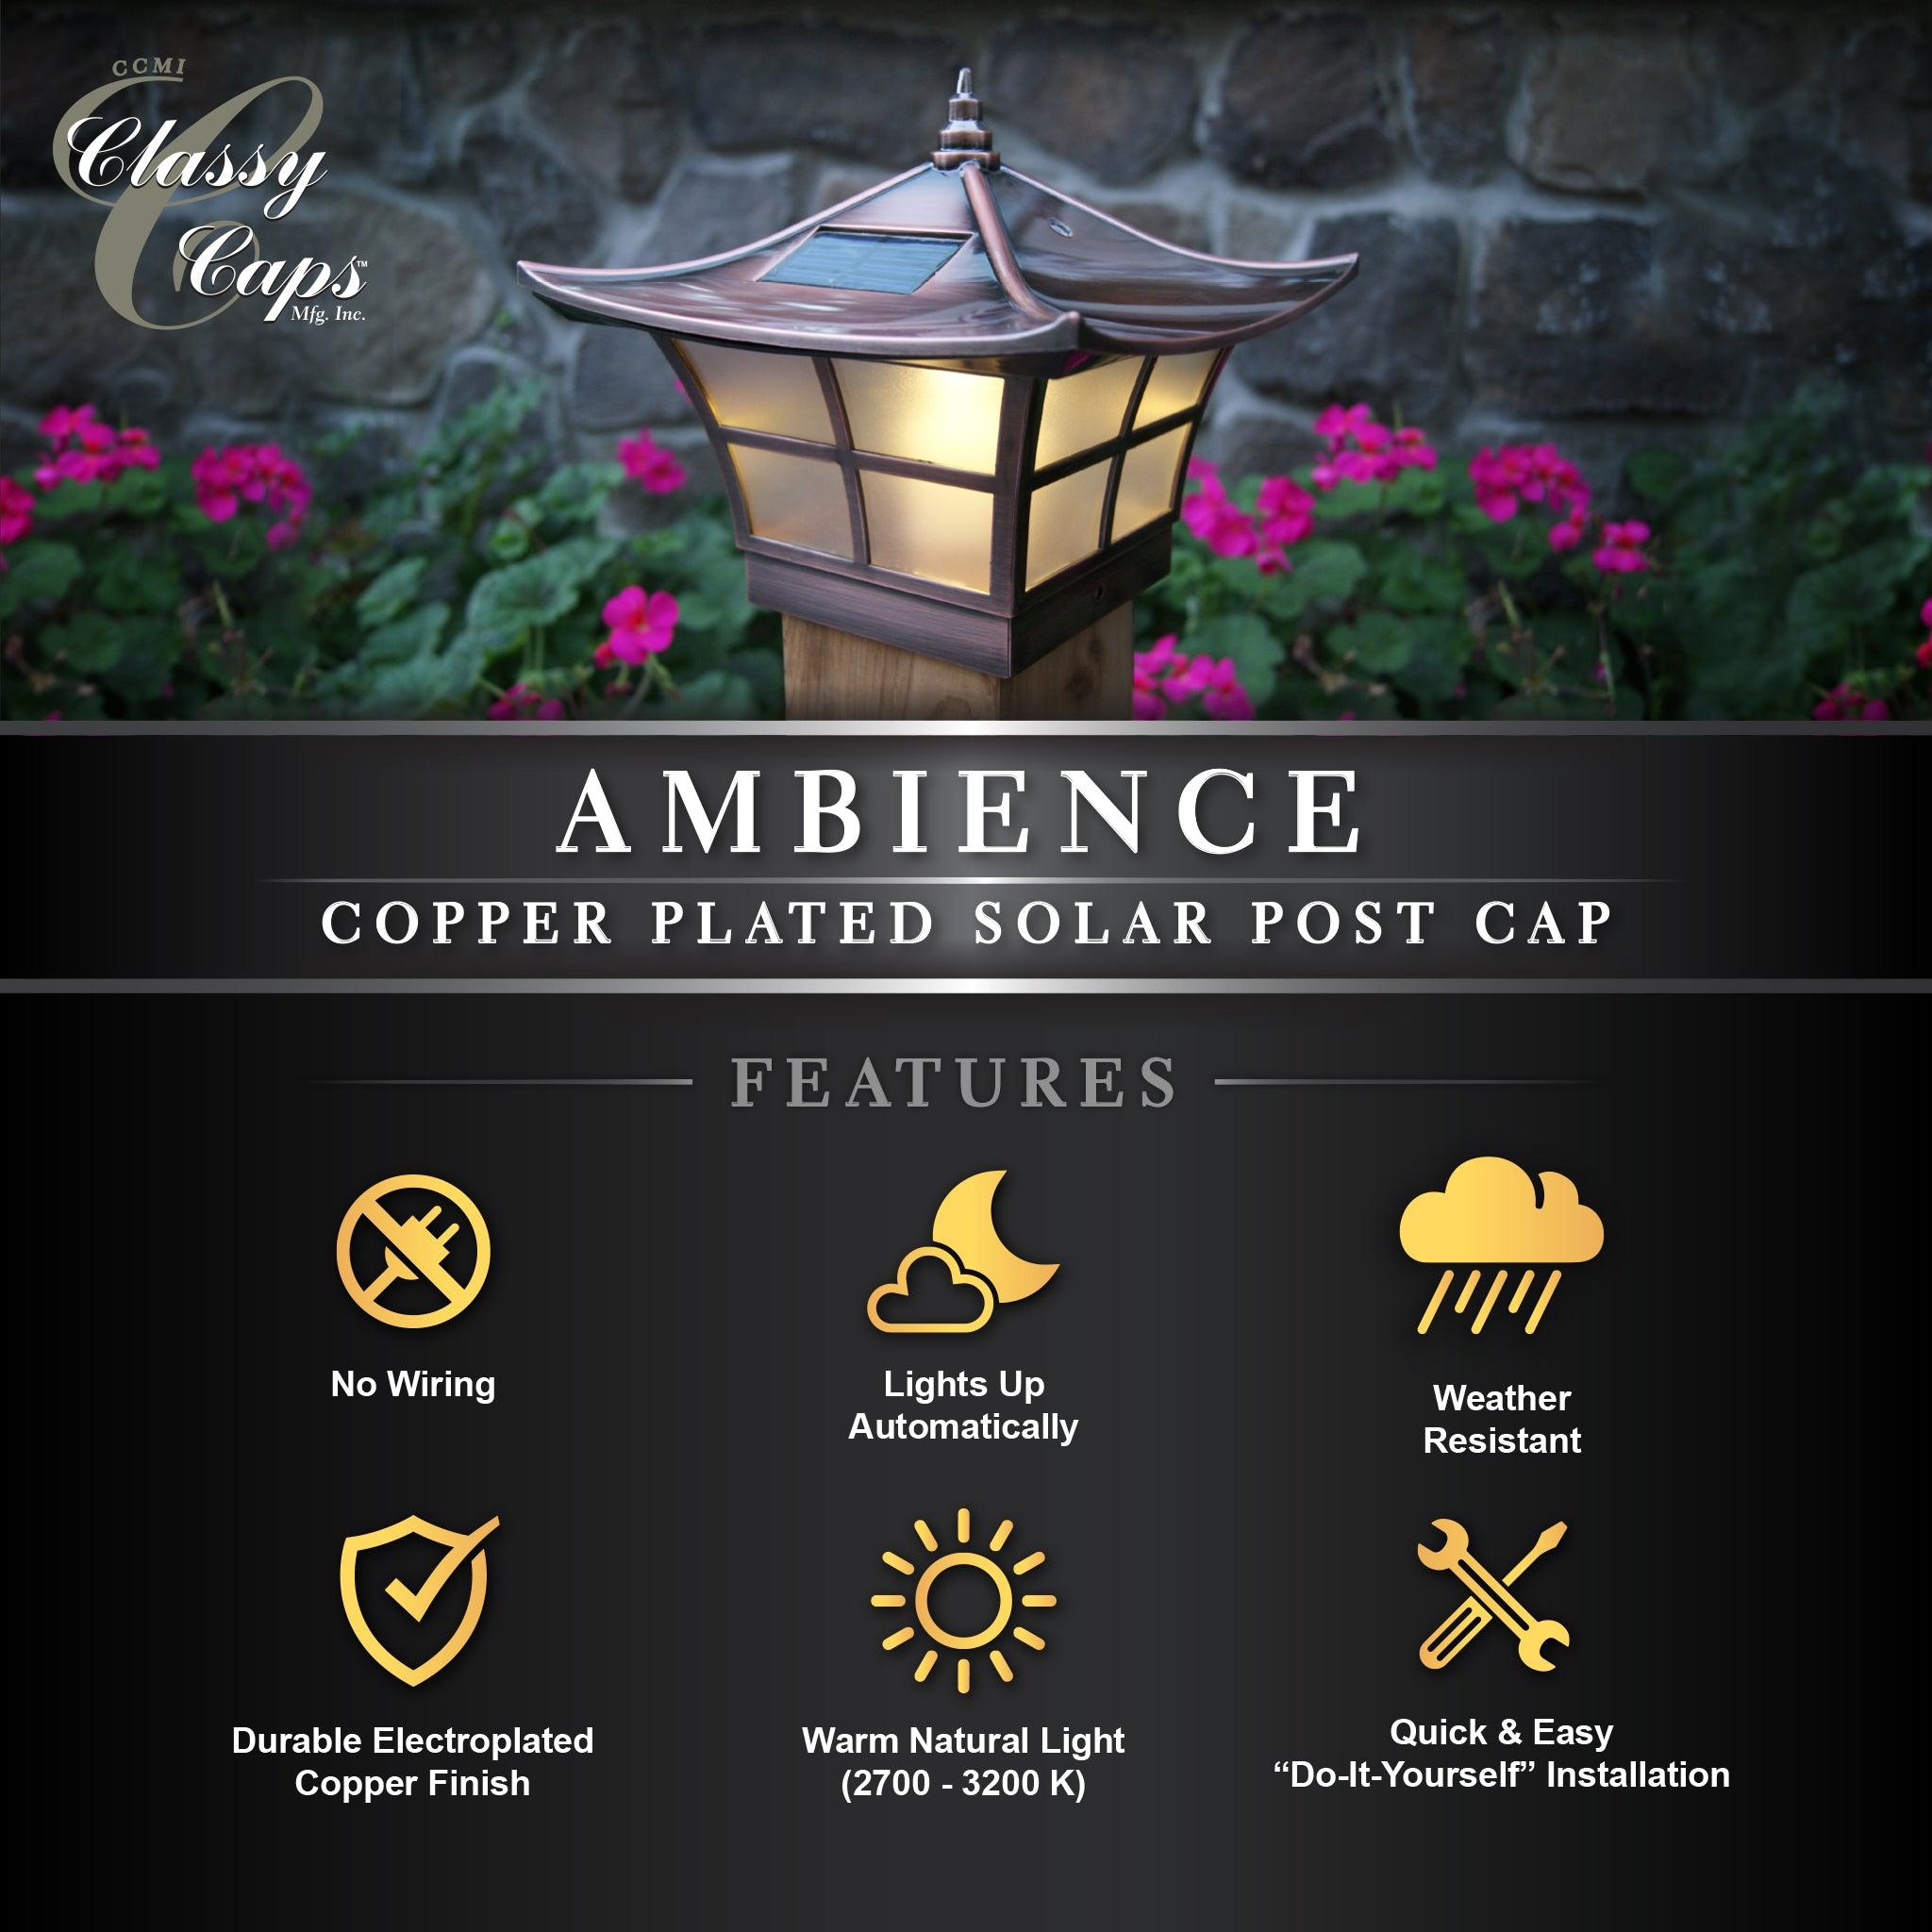 Ambience Solar Post Cap - Copper Electroplated - Classy Caps Mfg. Inc.